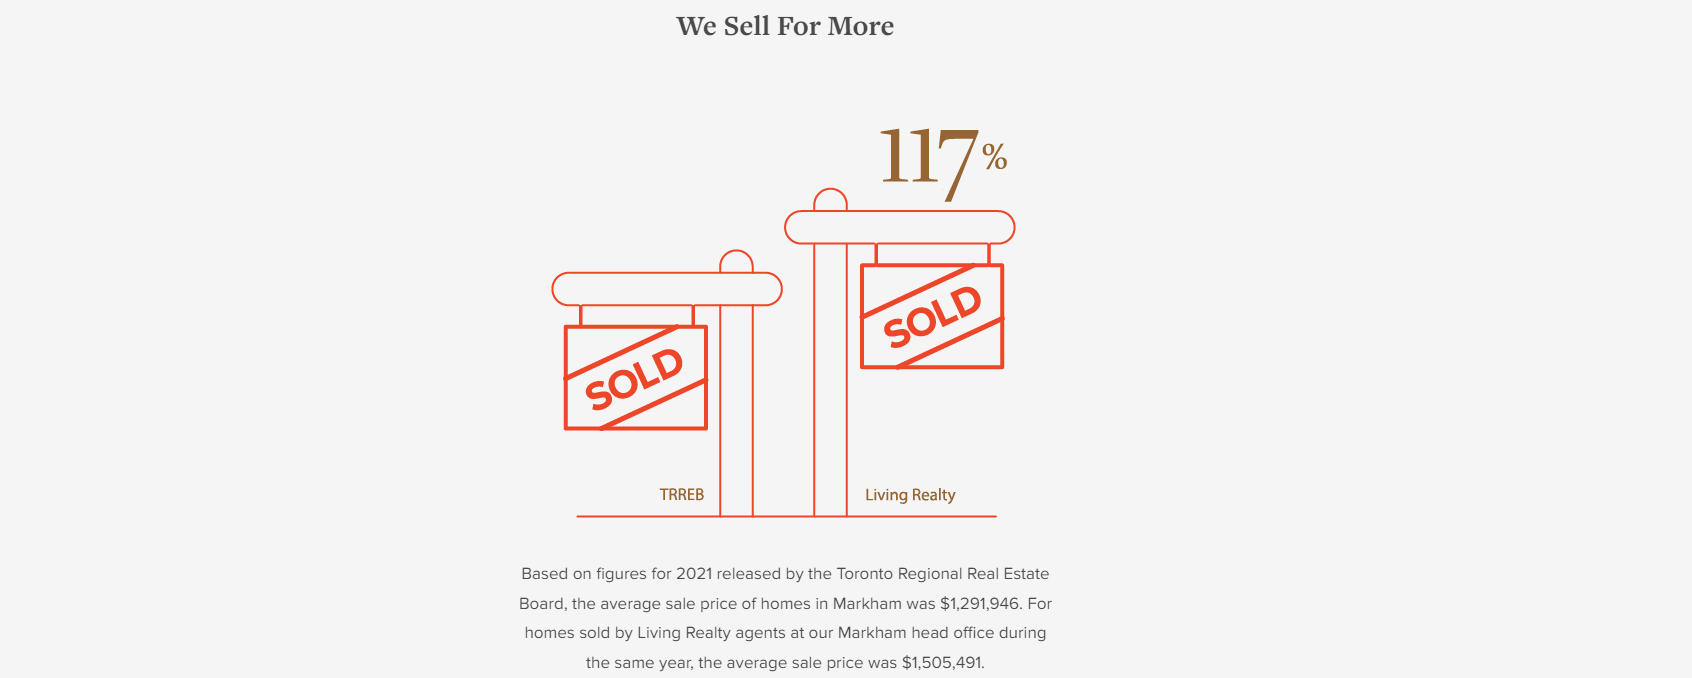 Graphic showing Living Realty outselling other brokerages in Toronto real estate.